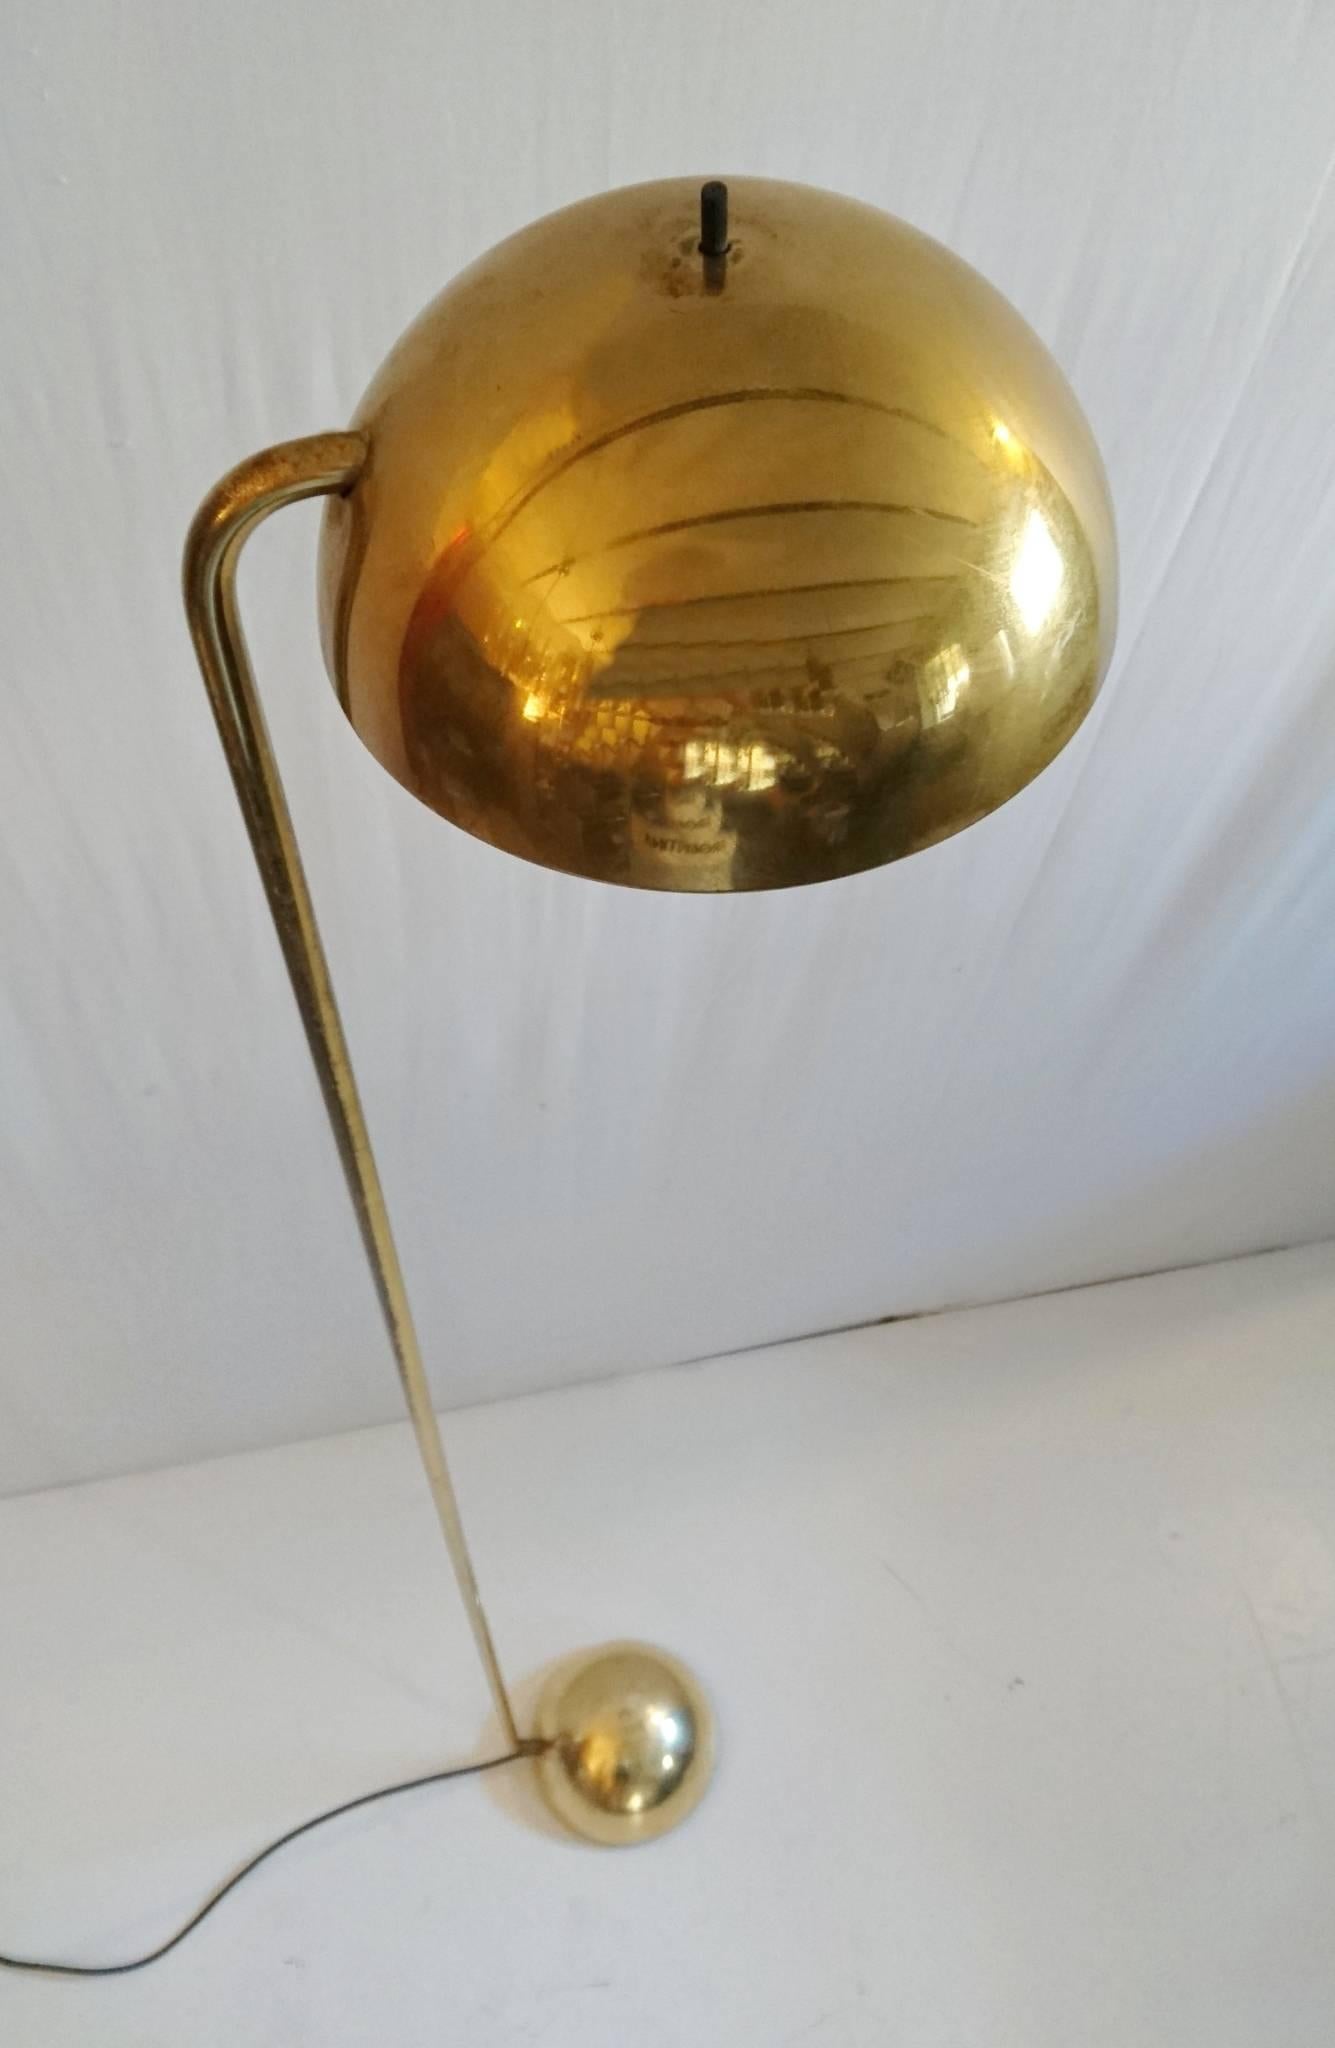 Tall Italian 1980s floor lamp in brass, designed by Barbieri and Marianelli for Tronconi. Lamp has a heavy base and is quite sturdy. The actual lamp can be rotated to point upwards as well as downwards. Rewired with dimmer switch.